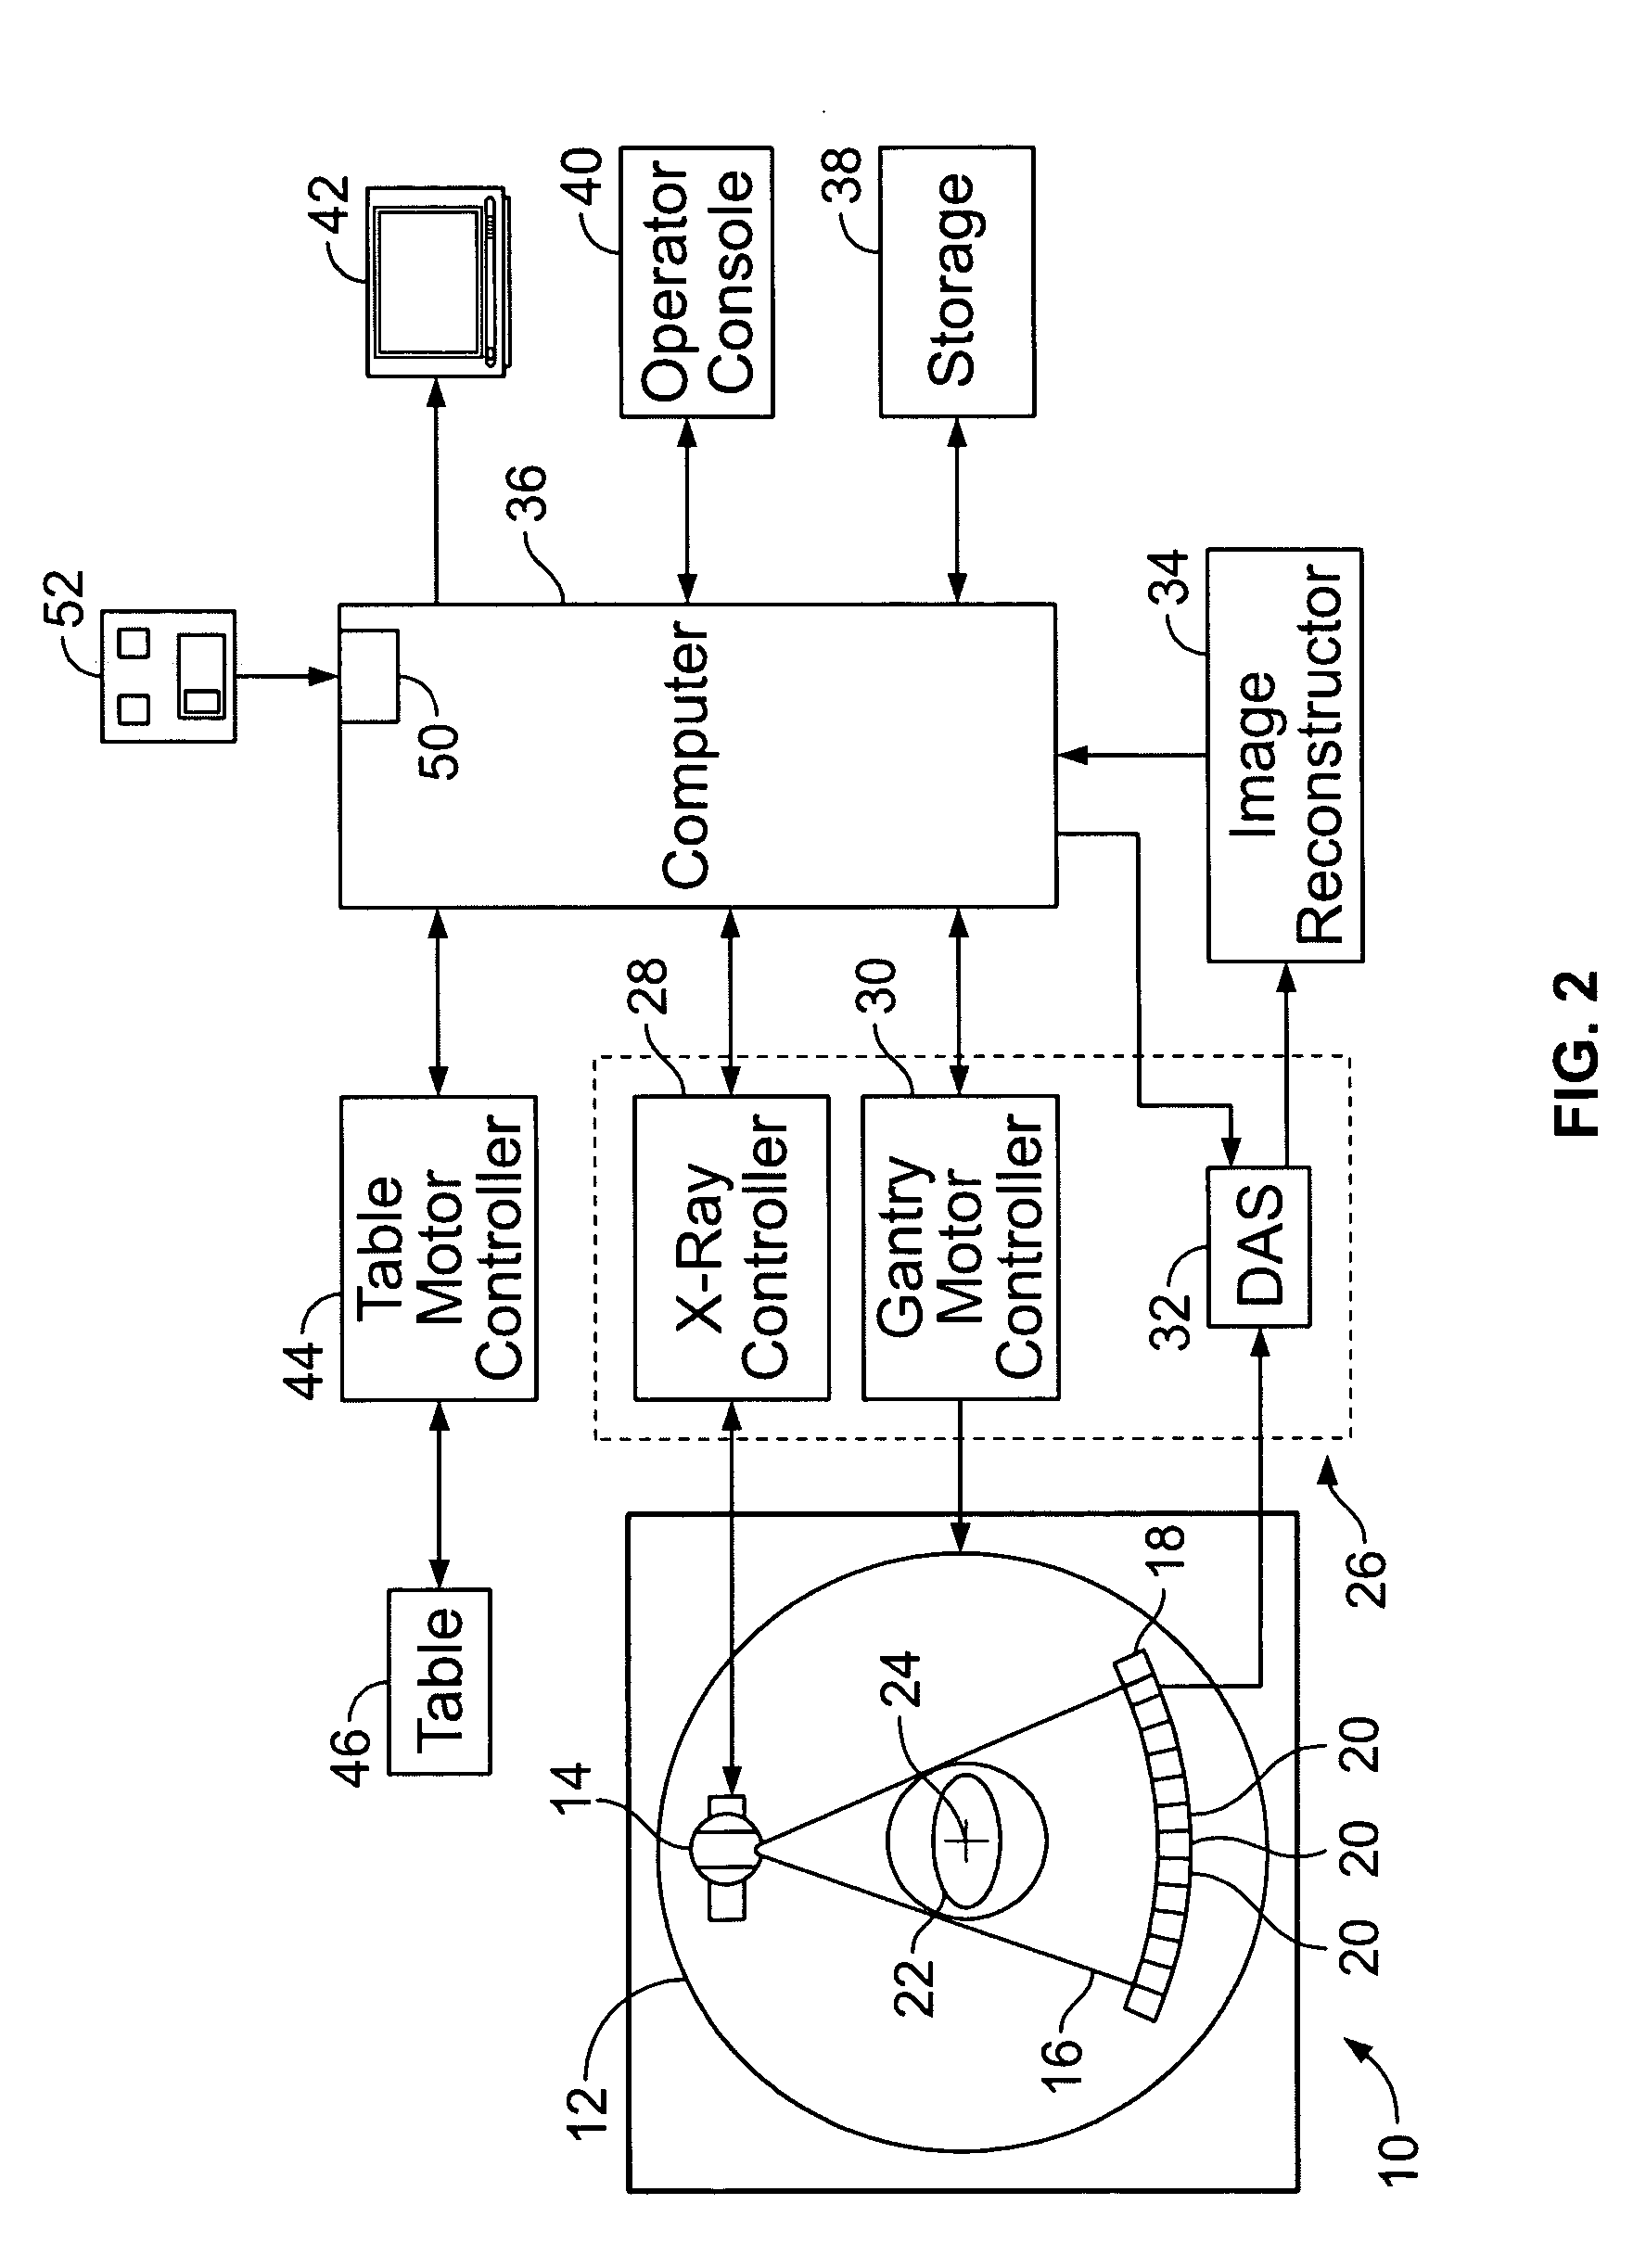 Methods and systems for tracking instruments in fluoroscopy